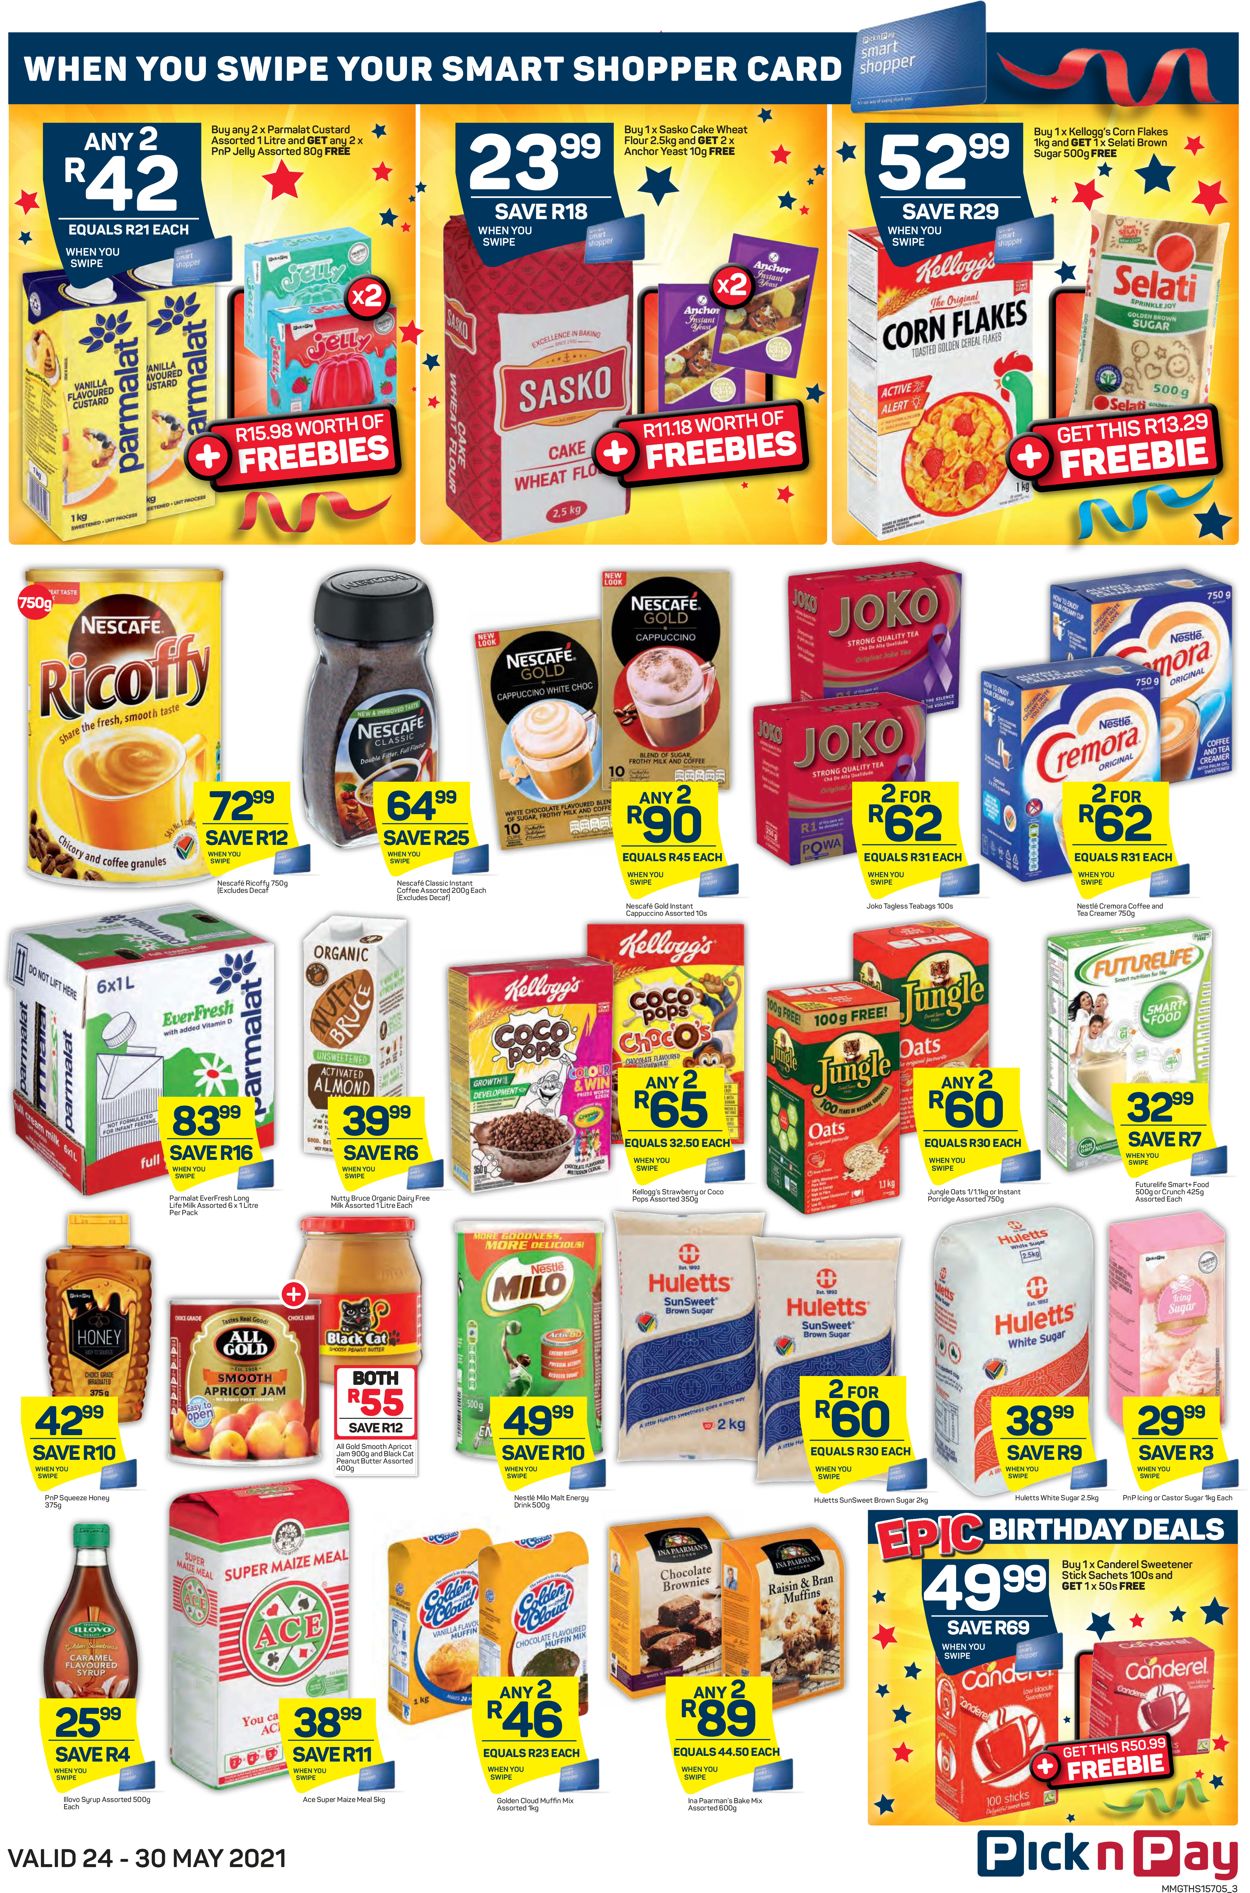 Pick n Pay Catalogue - 2021/05/24-2021/05/30 (Page 3)